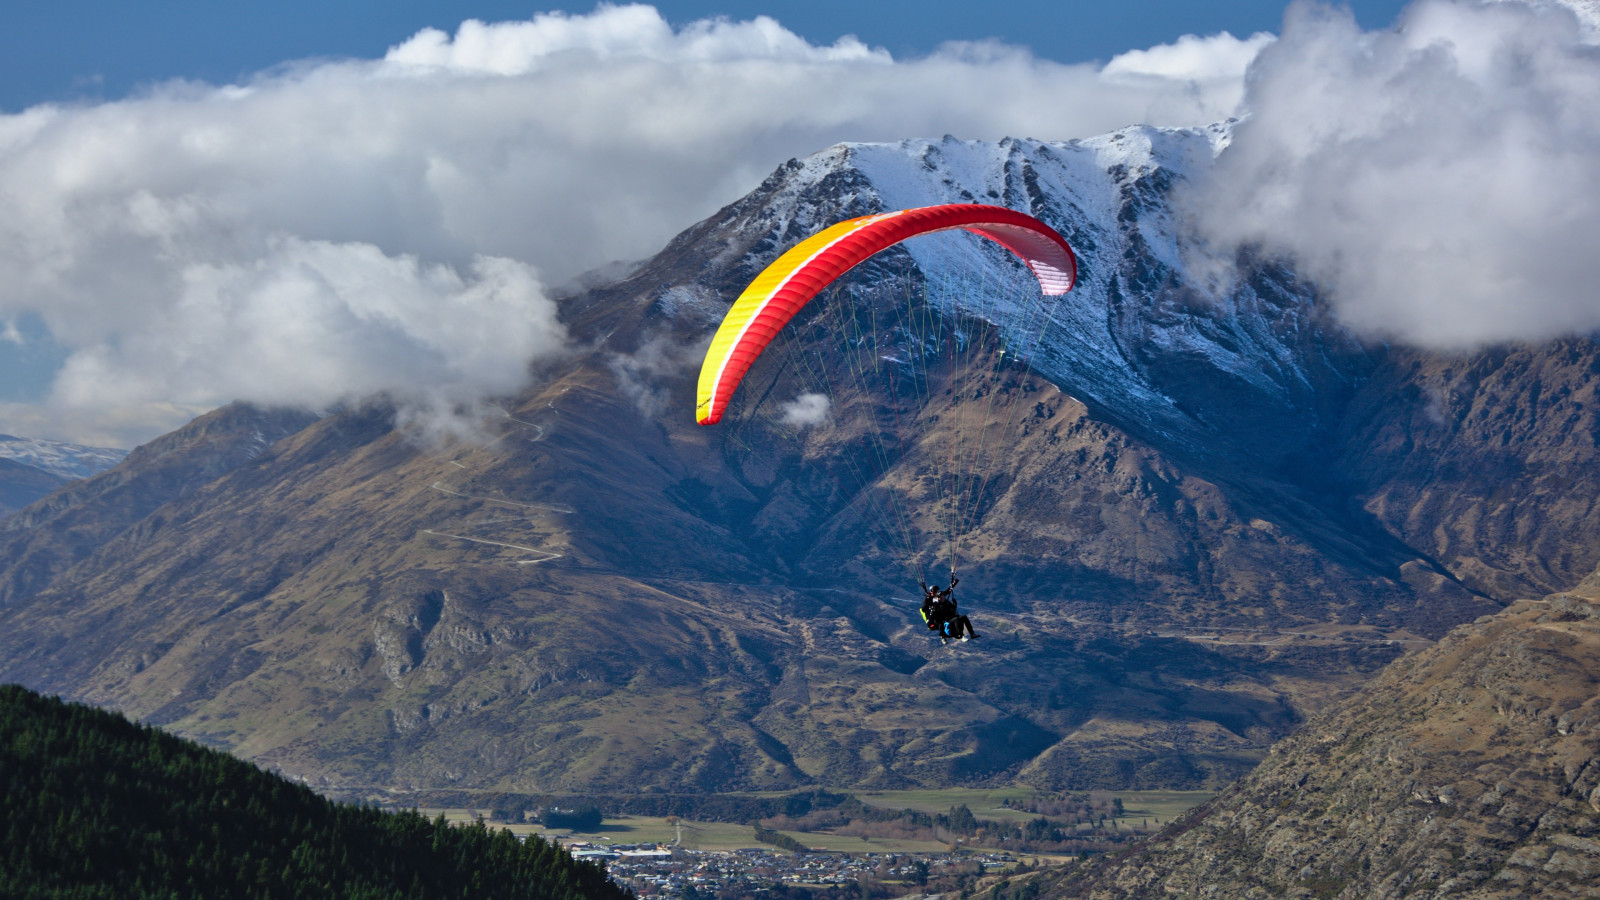 Paraglider up in the sky wallpaper 1600x900